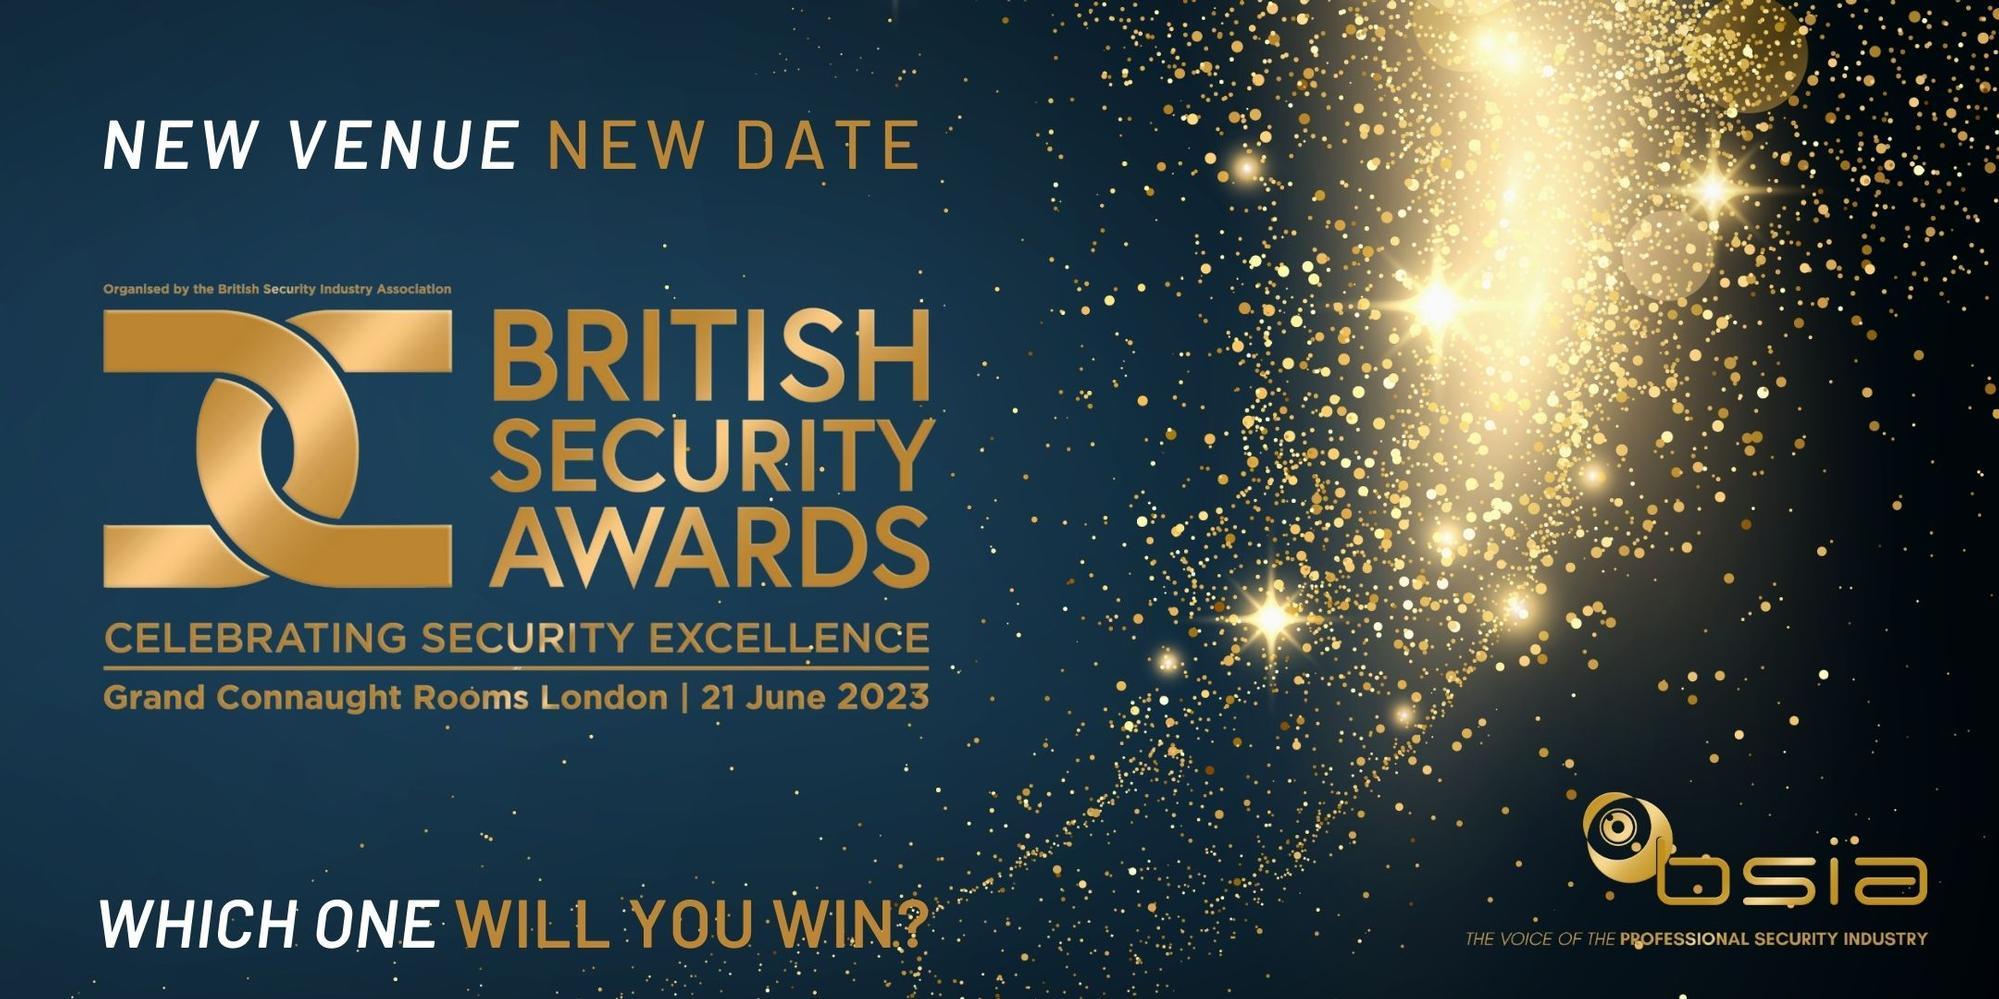 British Security Awards moves to new venue and date for 2023